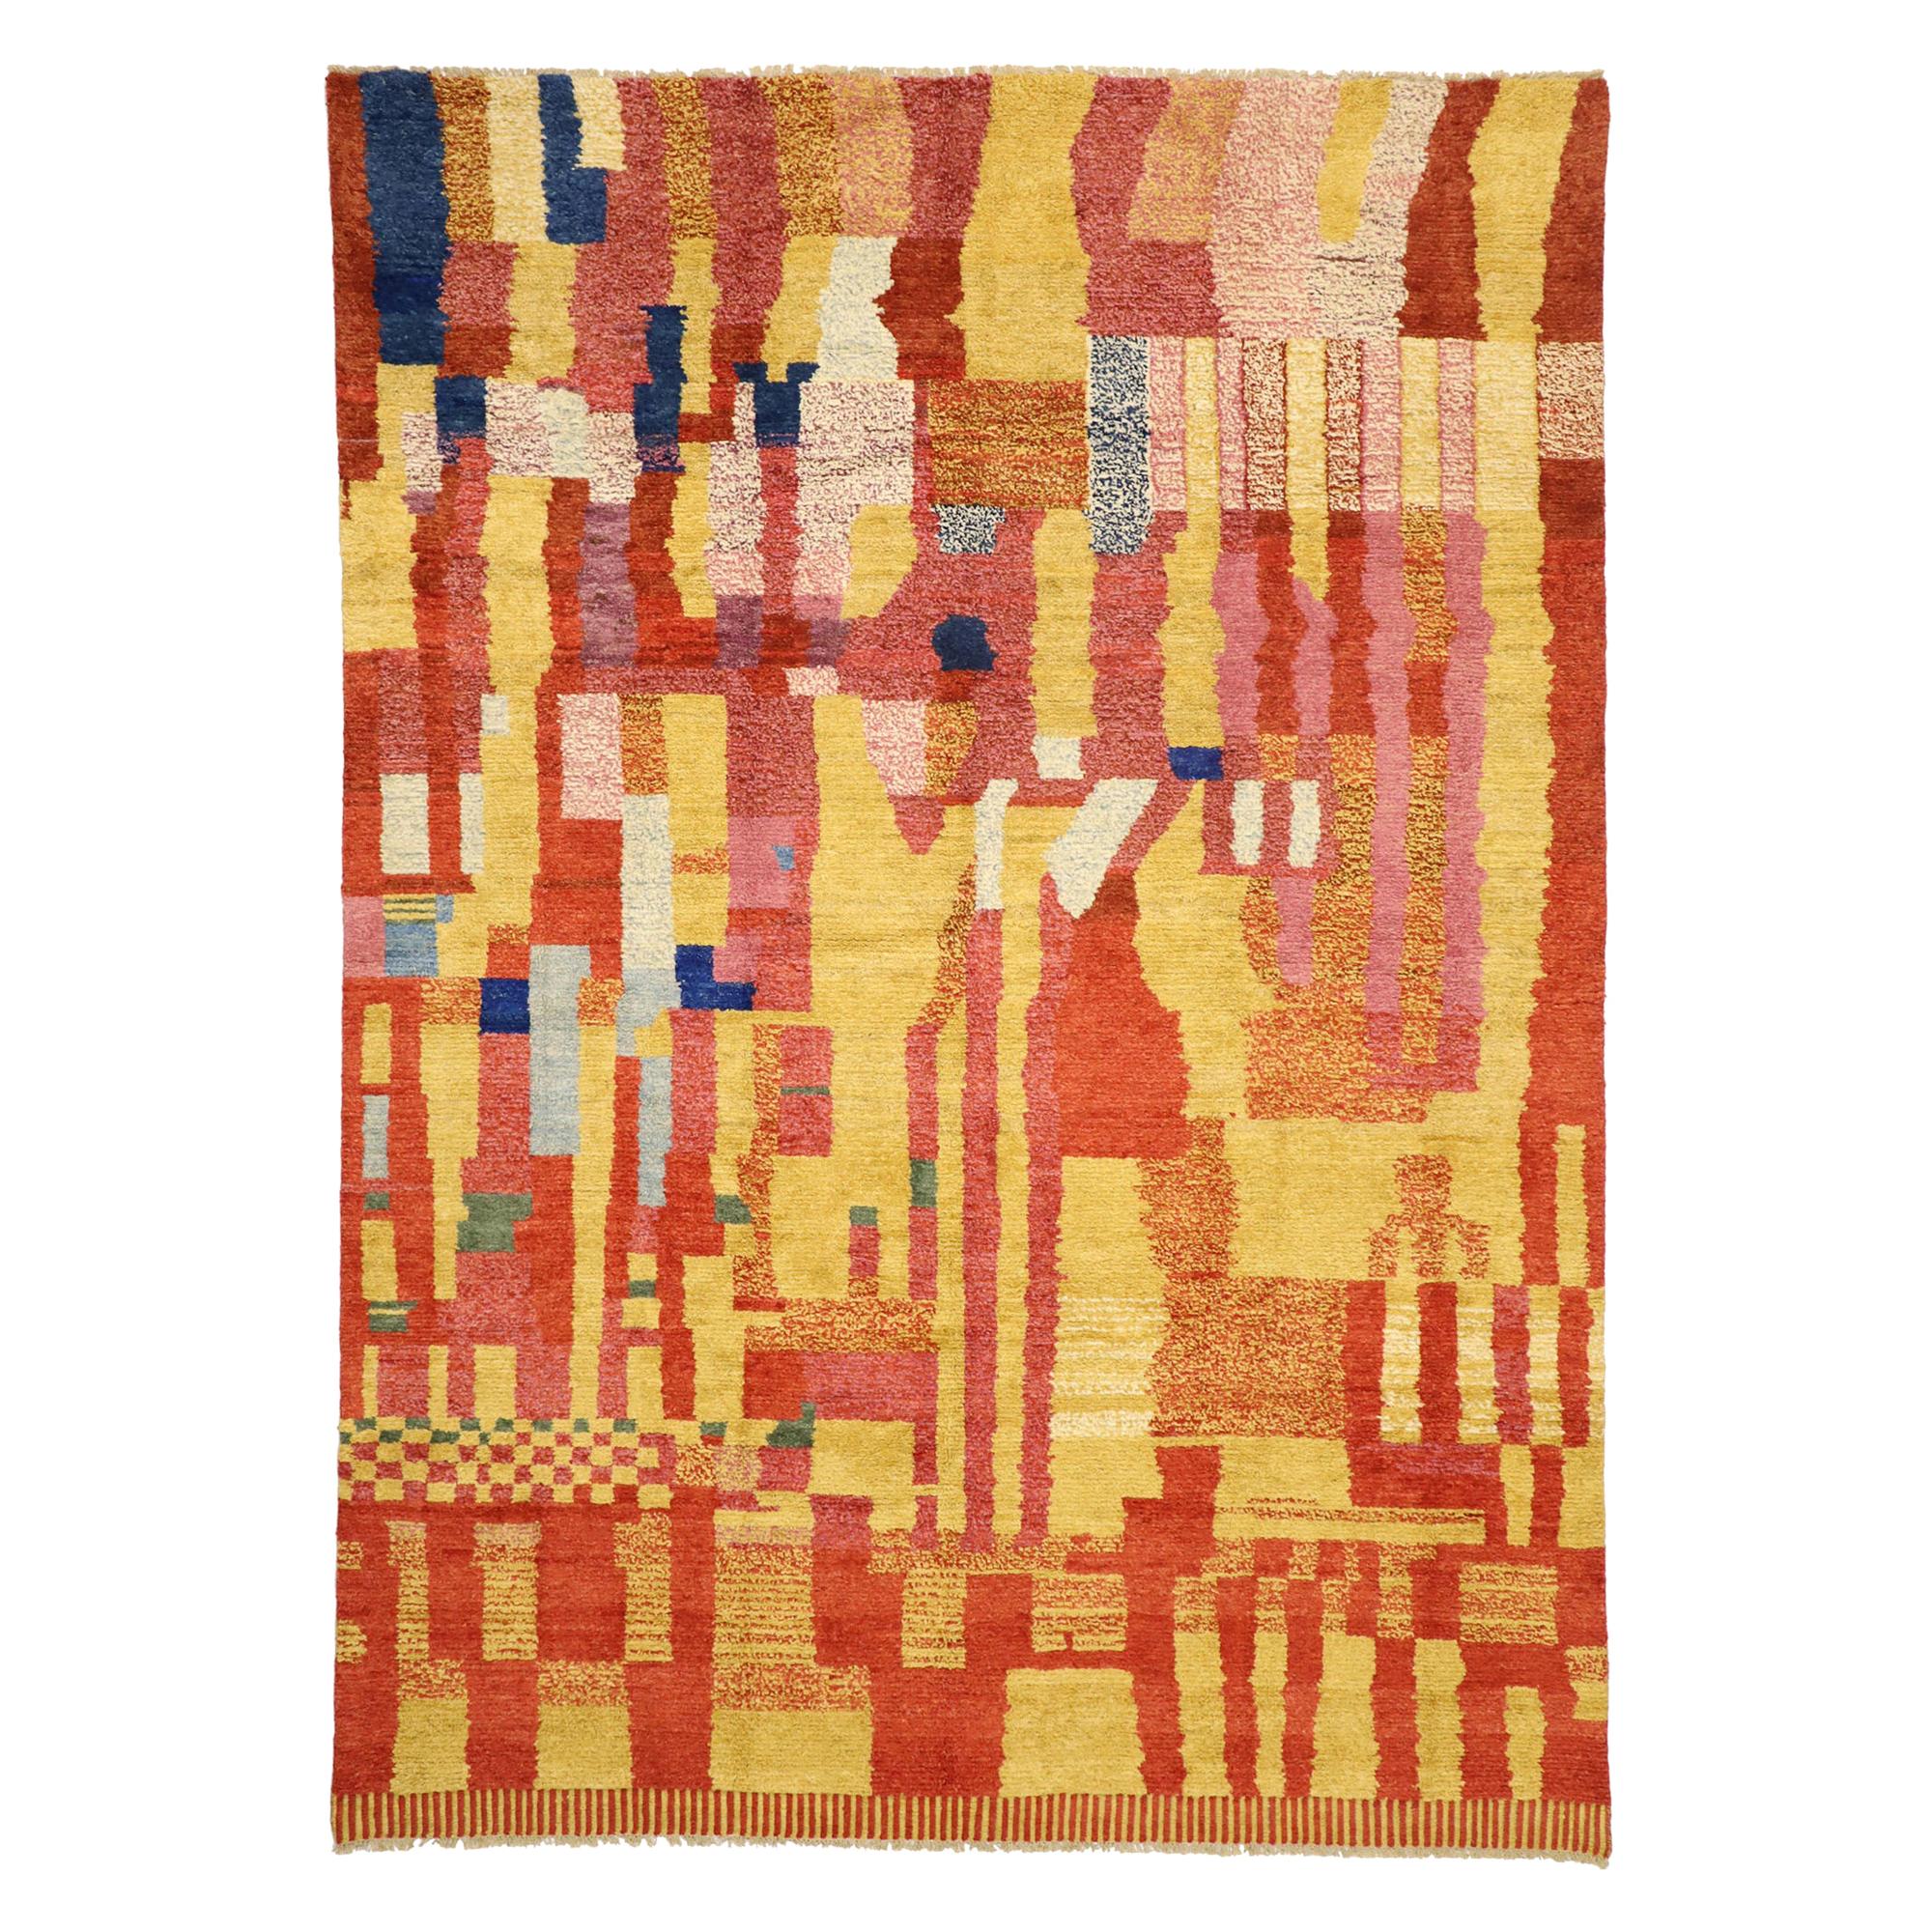 New Color Block Moroccan Rug with Abstract Cubist Style Inspired by Paul Klee For Sale